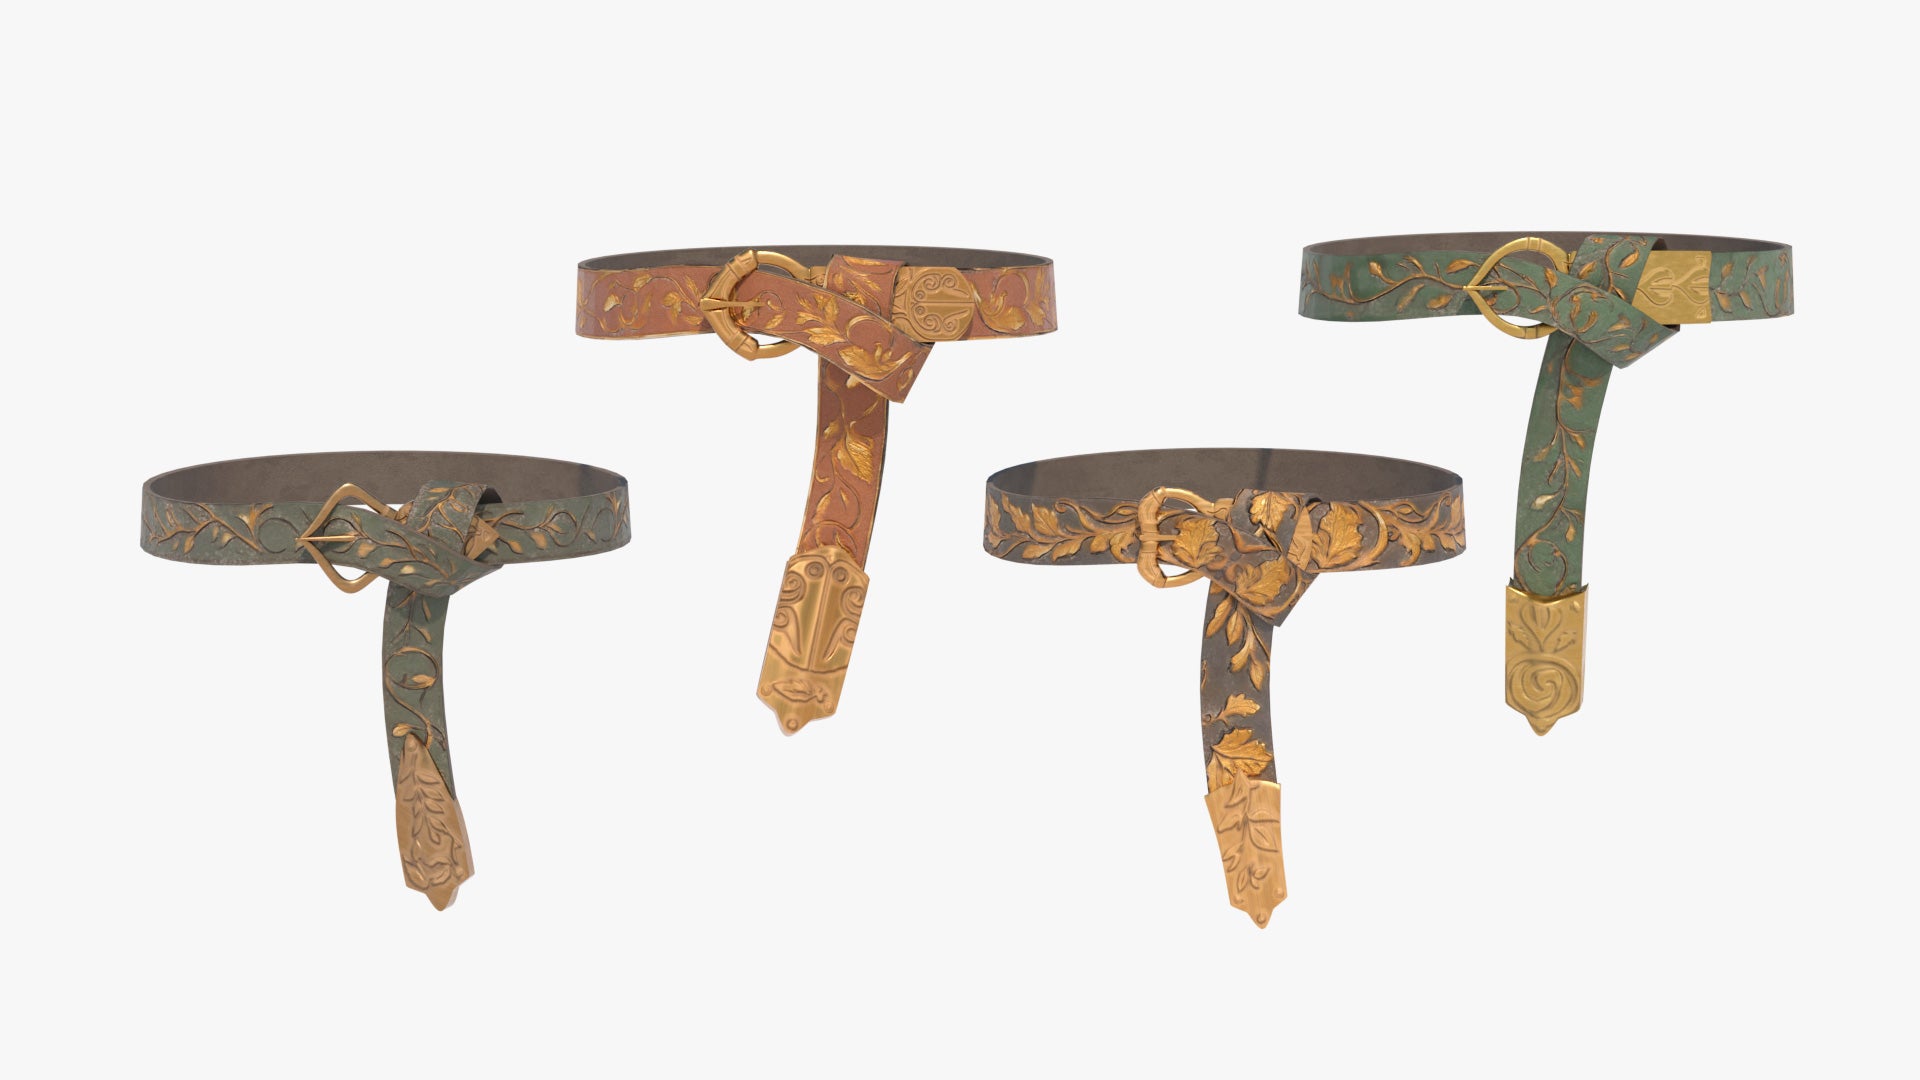 3D model of four medieval fantasy belts made of embossed leather with floral patterns, painted in gold, with elegant ancient buckles/ PBR textures and lowpoly